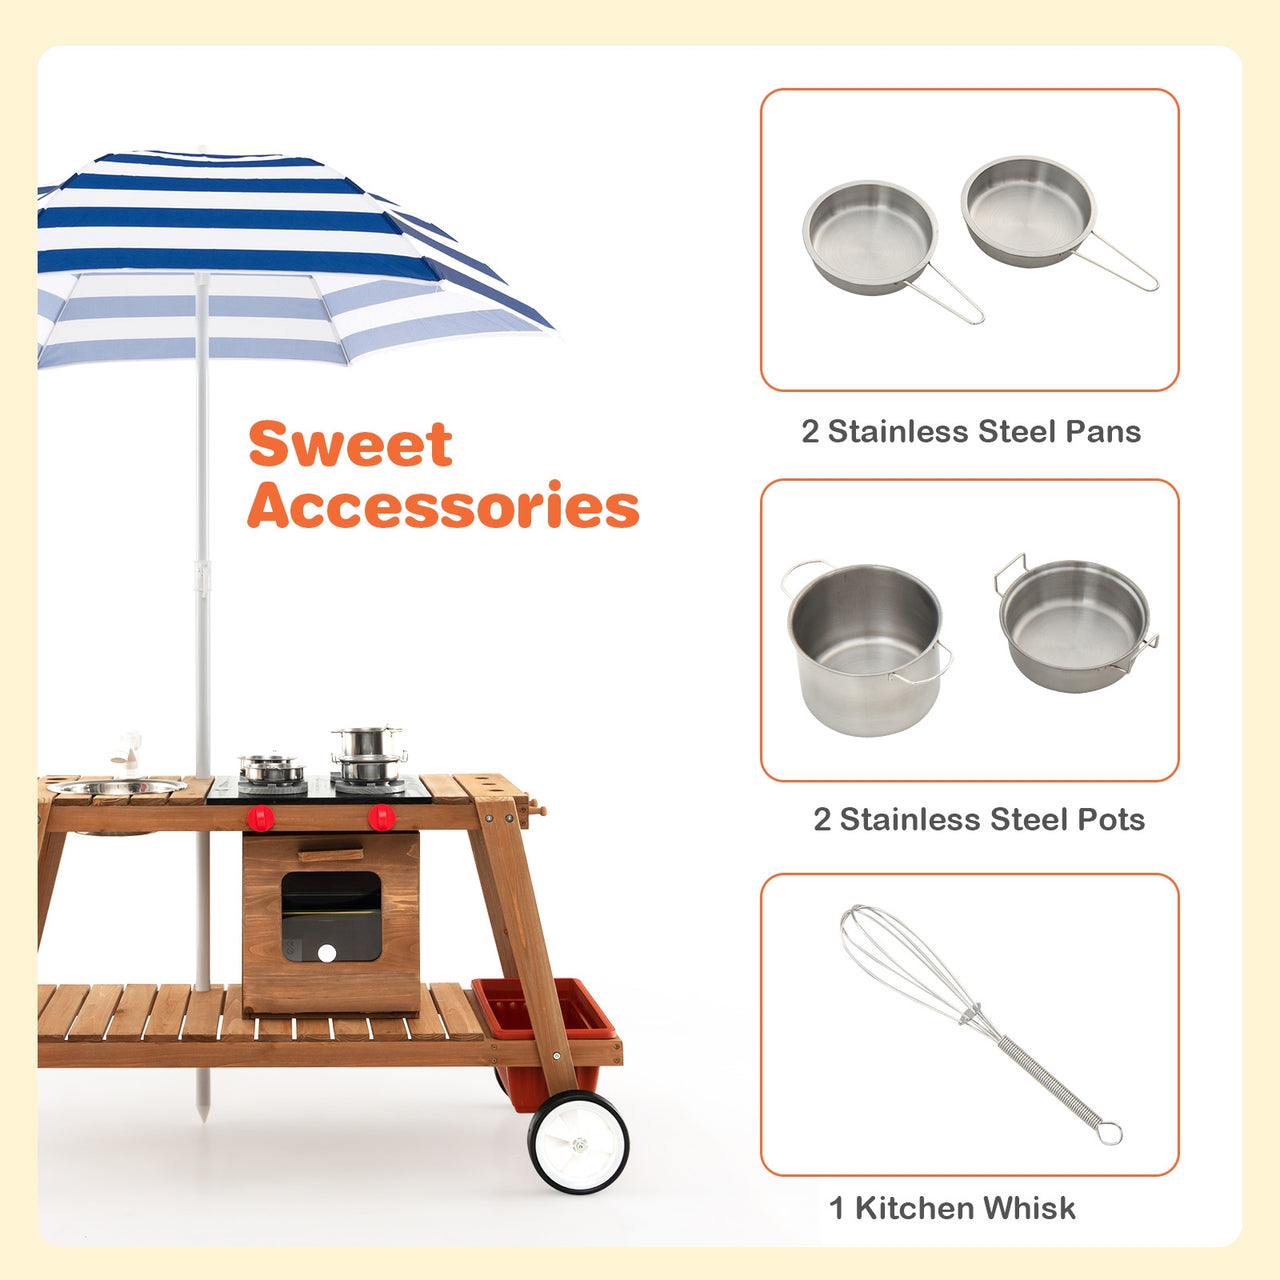 Wooden Play Cart with Sun Proof Umbrella for Toddlers Over 3 Years Old - Gallery View 7 of 10